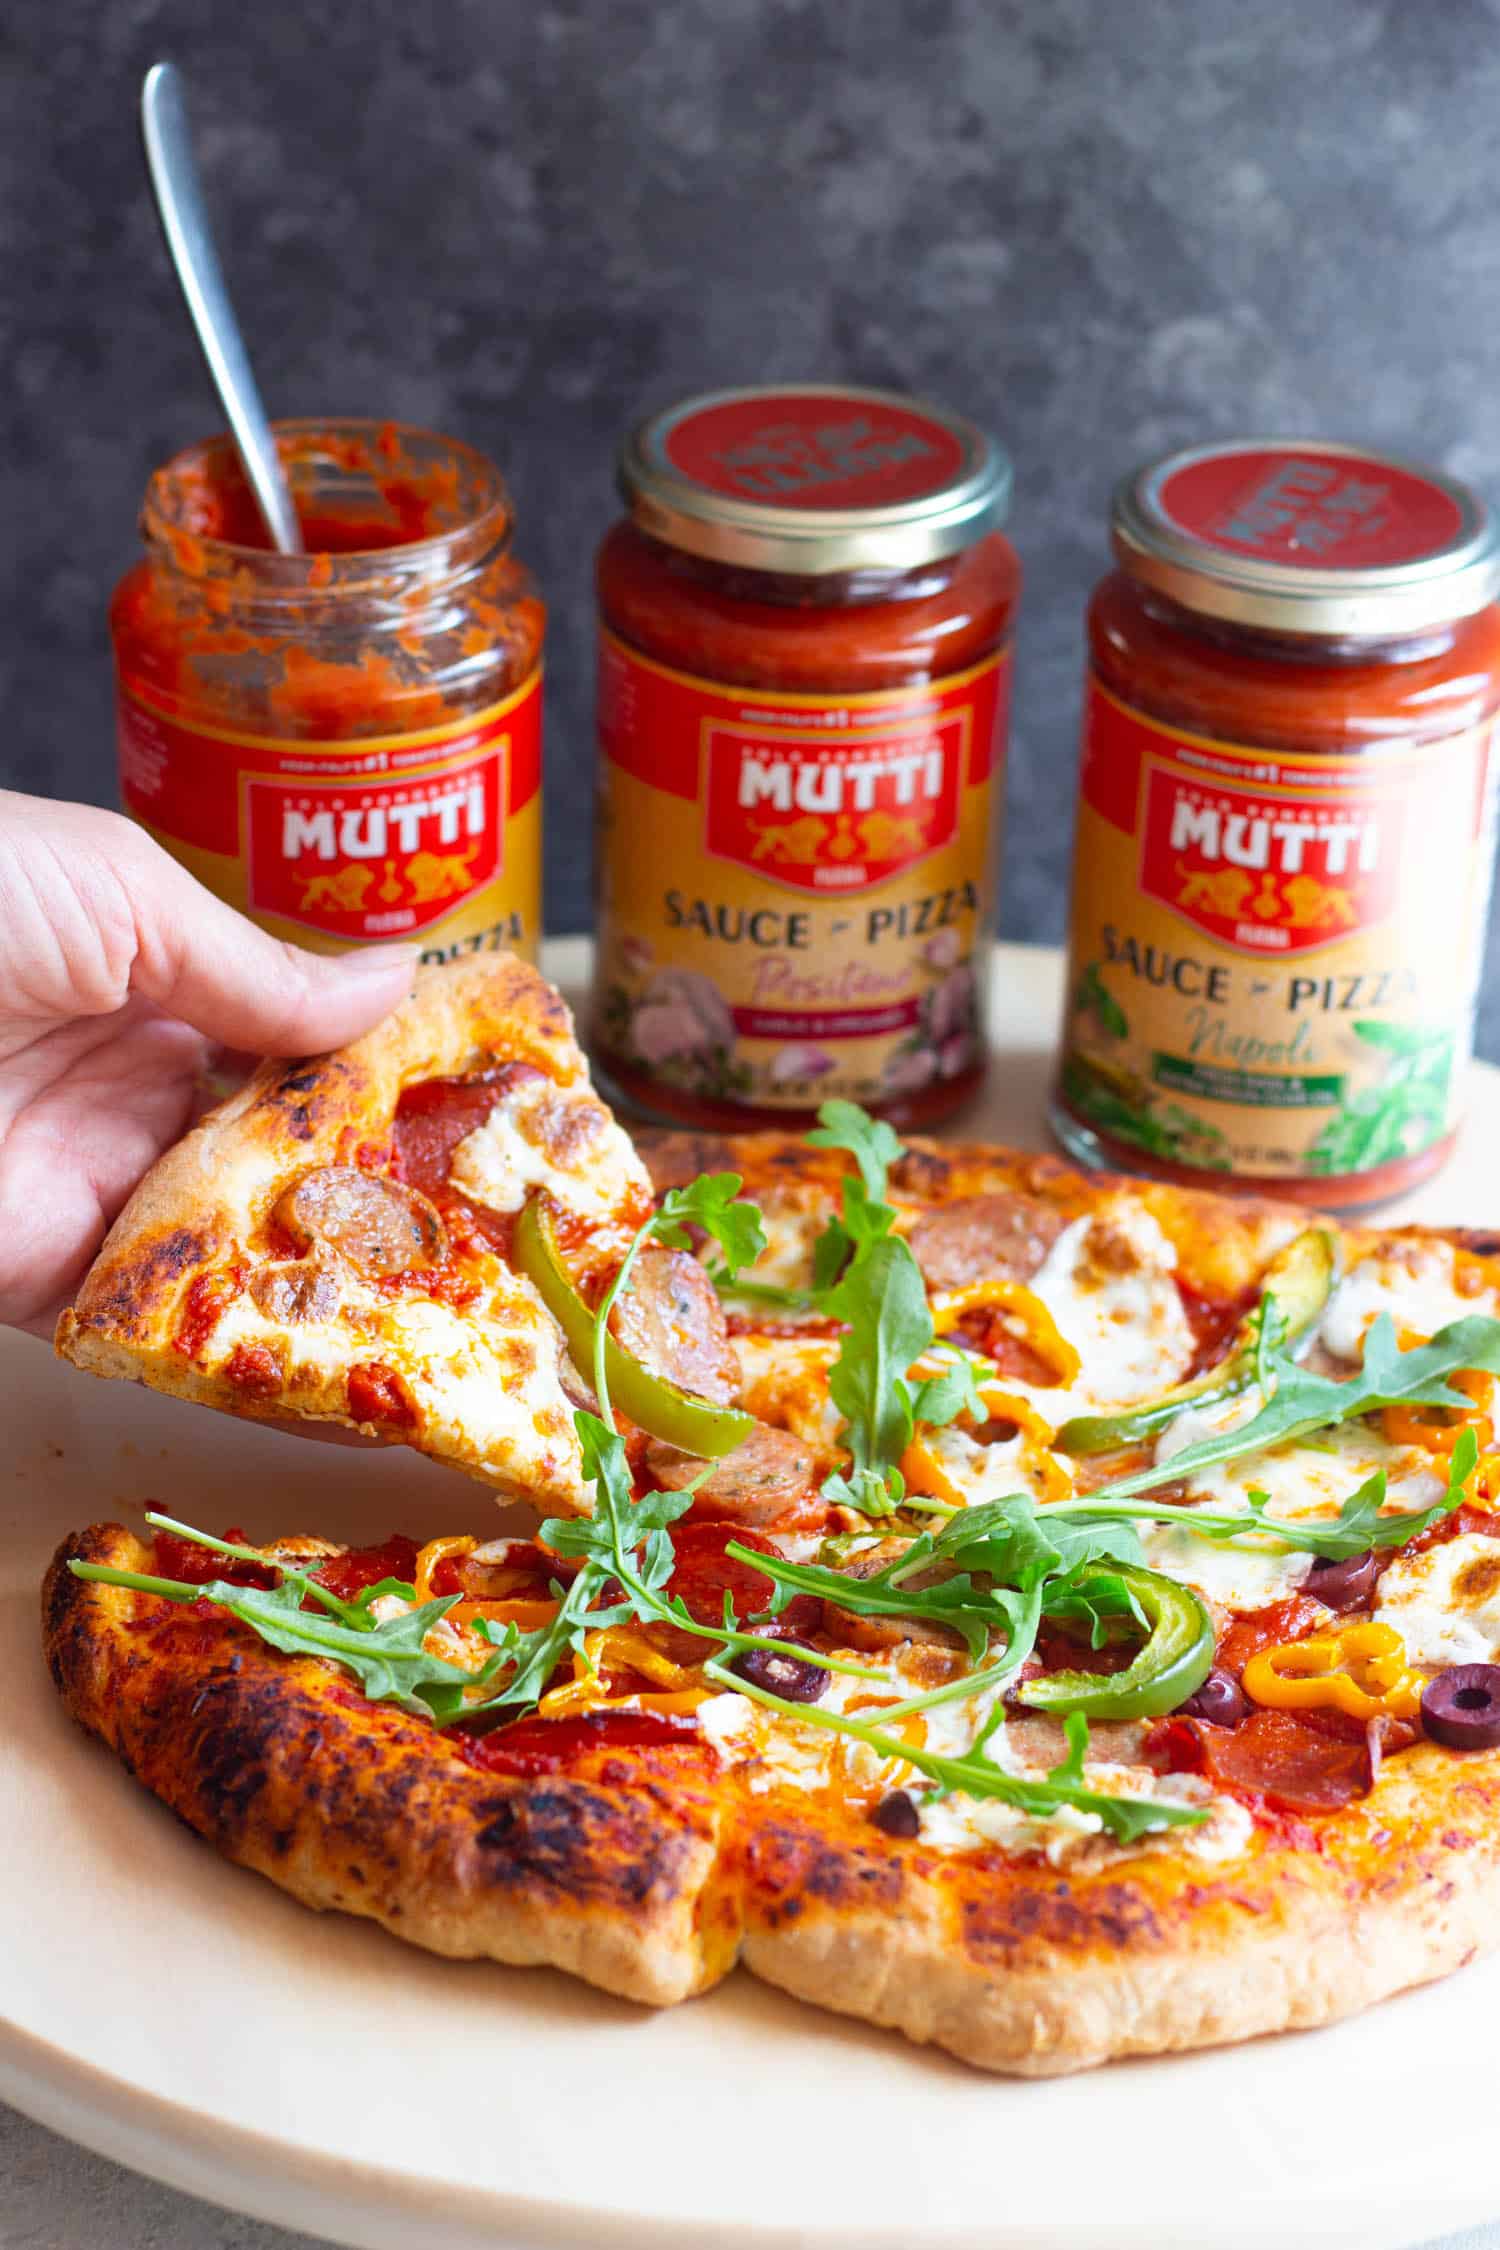 A delicious pizza sauce is a must when it comes to making pizza at home.